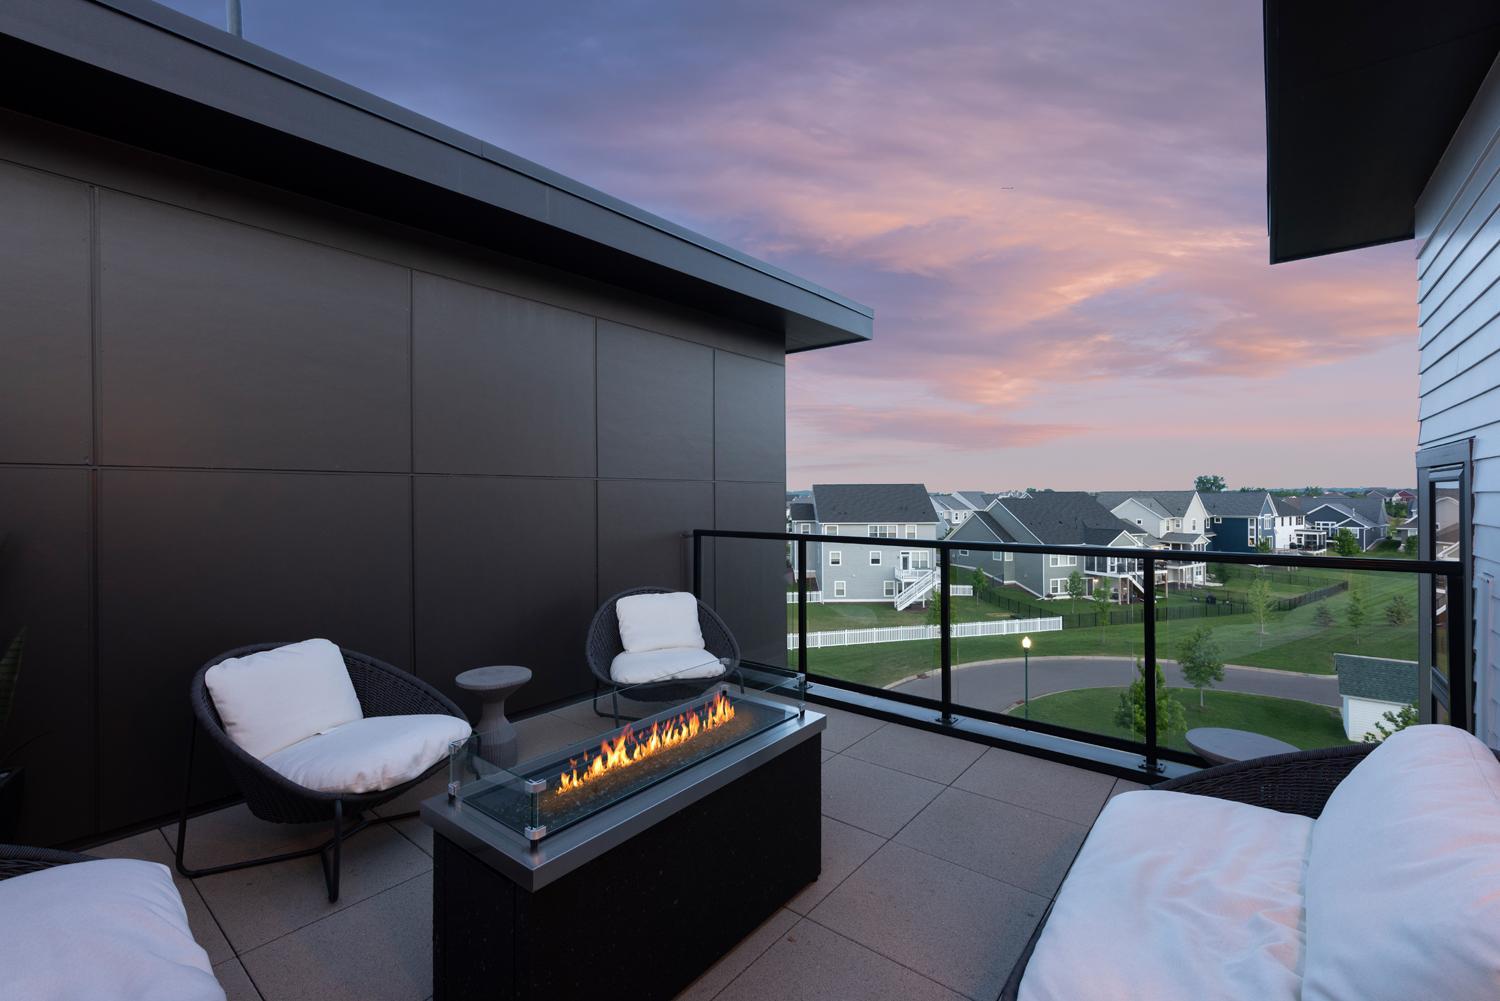 Enjoy quiet evenings up on your private rooftop patio!